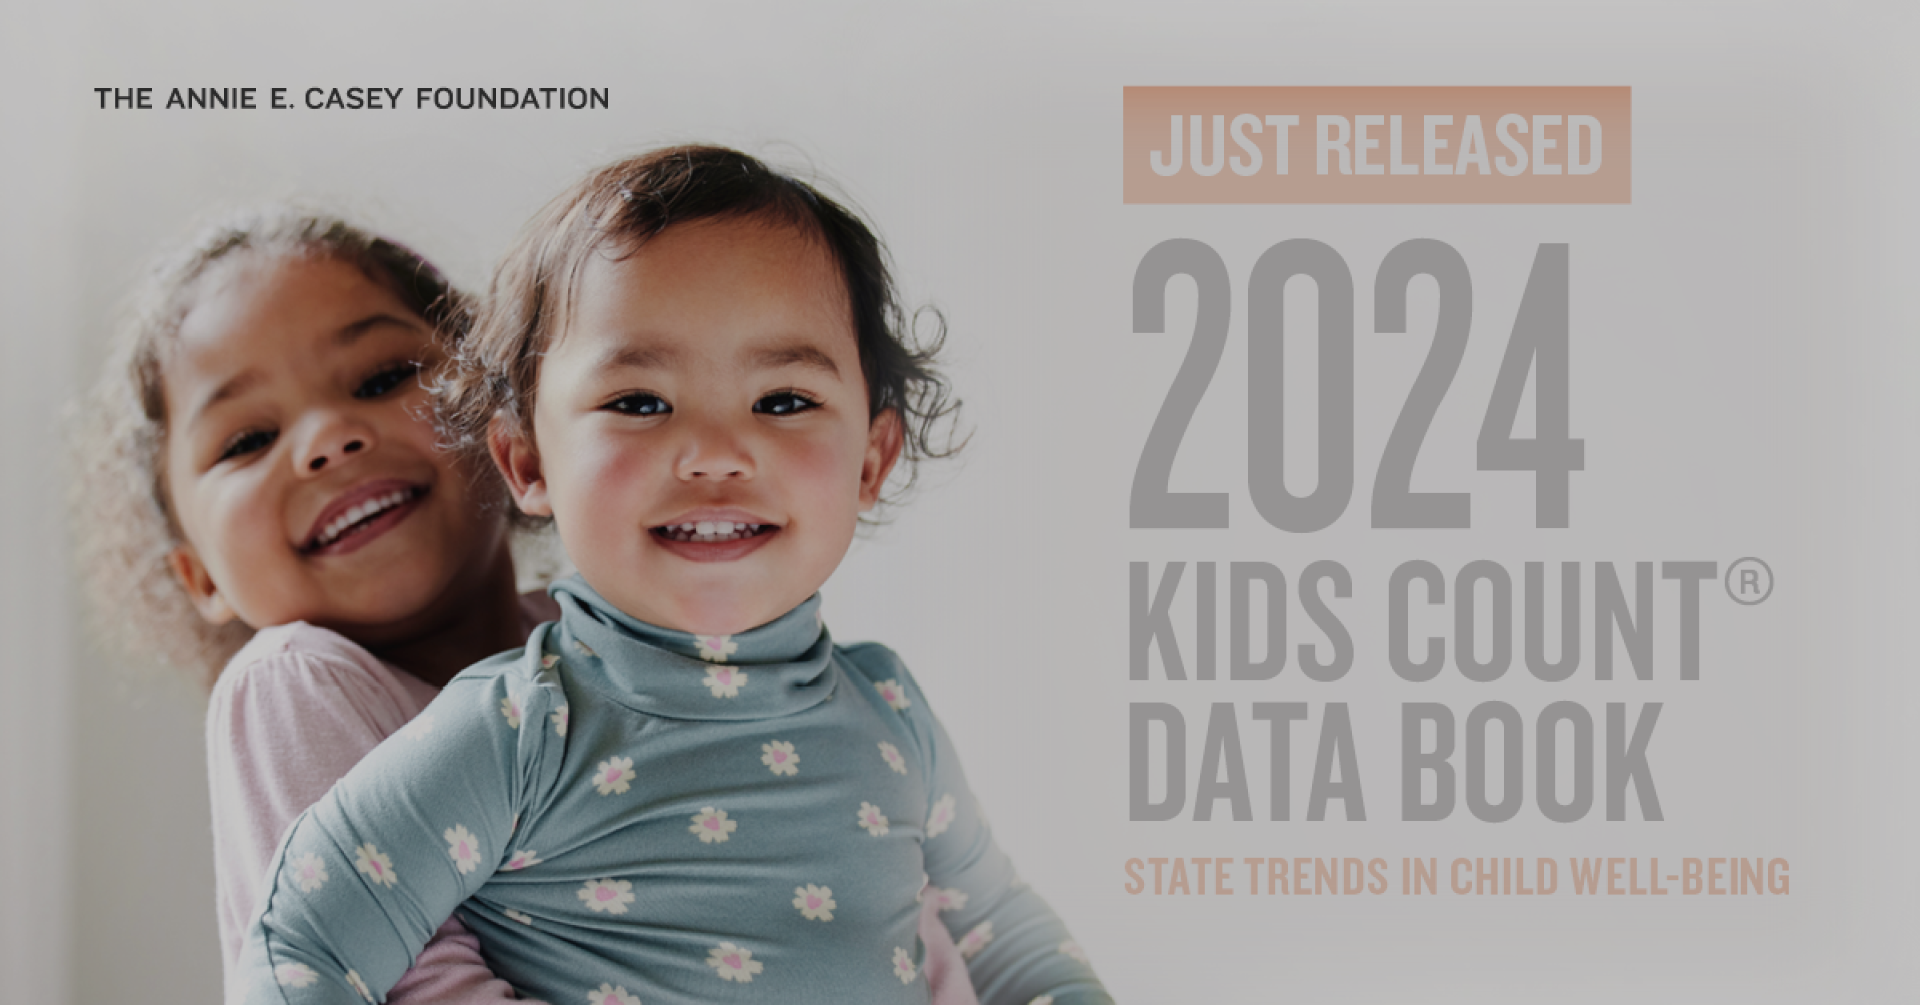 The 2024 Kids Count Data Book is Here!